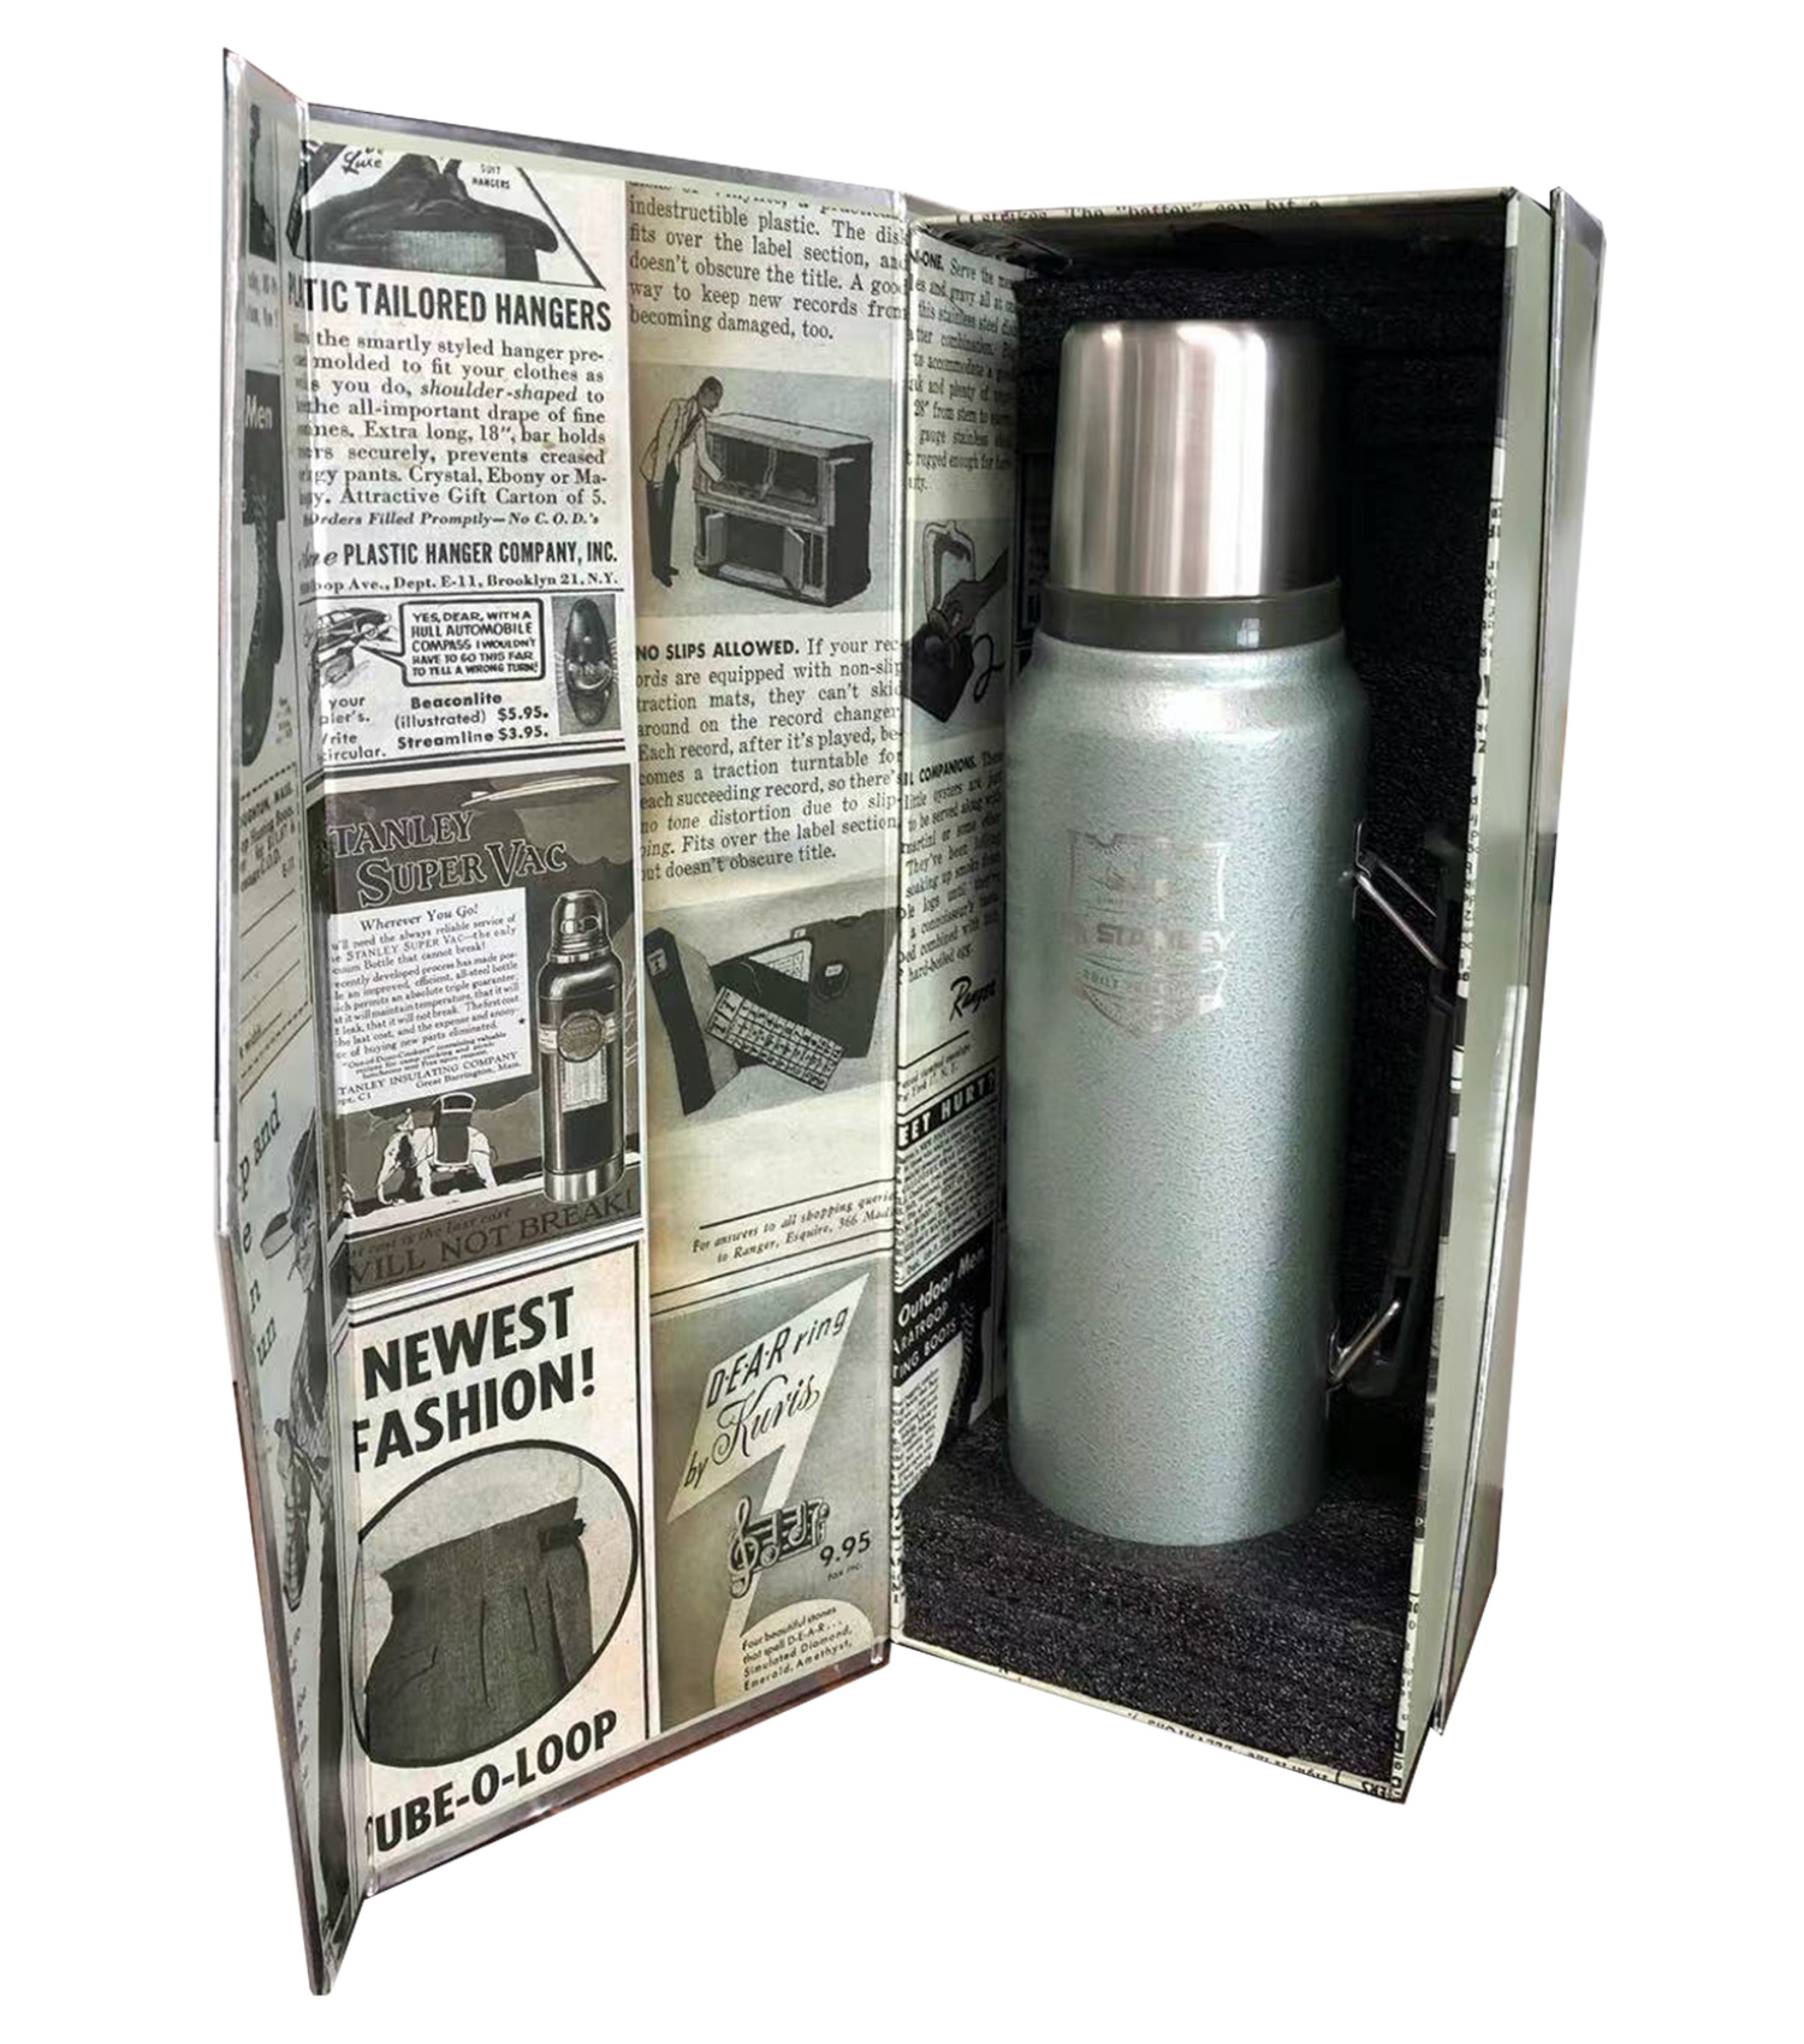 http://www.traveluniverse.com.au/Shared/Images/Product/Stanley-Classic-1-1-Litre-Vacuum-Insulated-Bottle-108th-Anniversary-Limited-Edition/88409-1.jpg